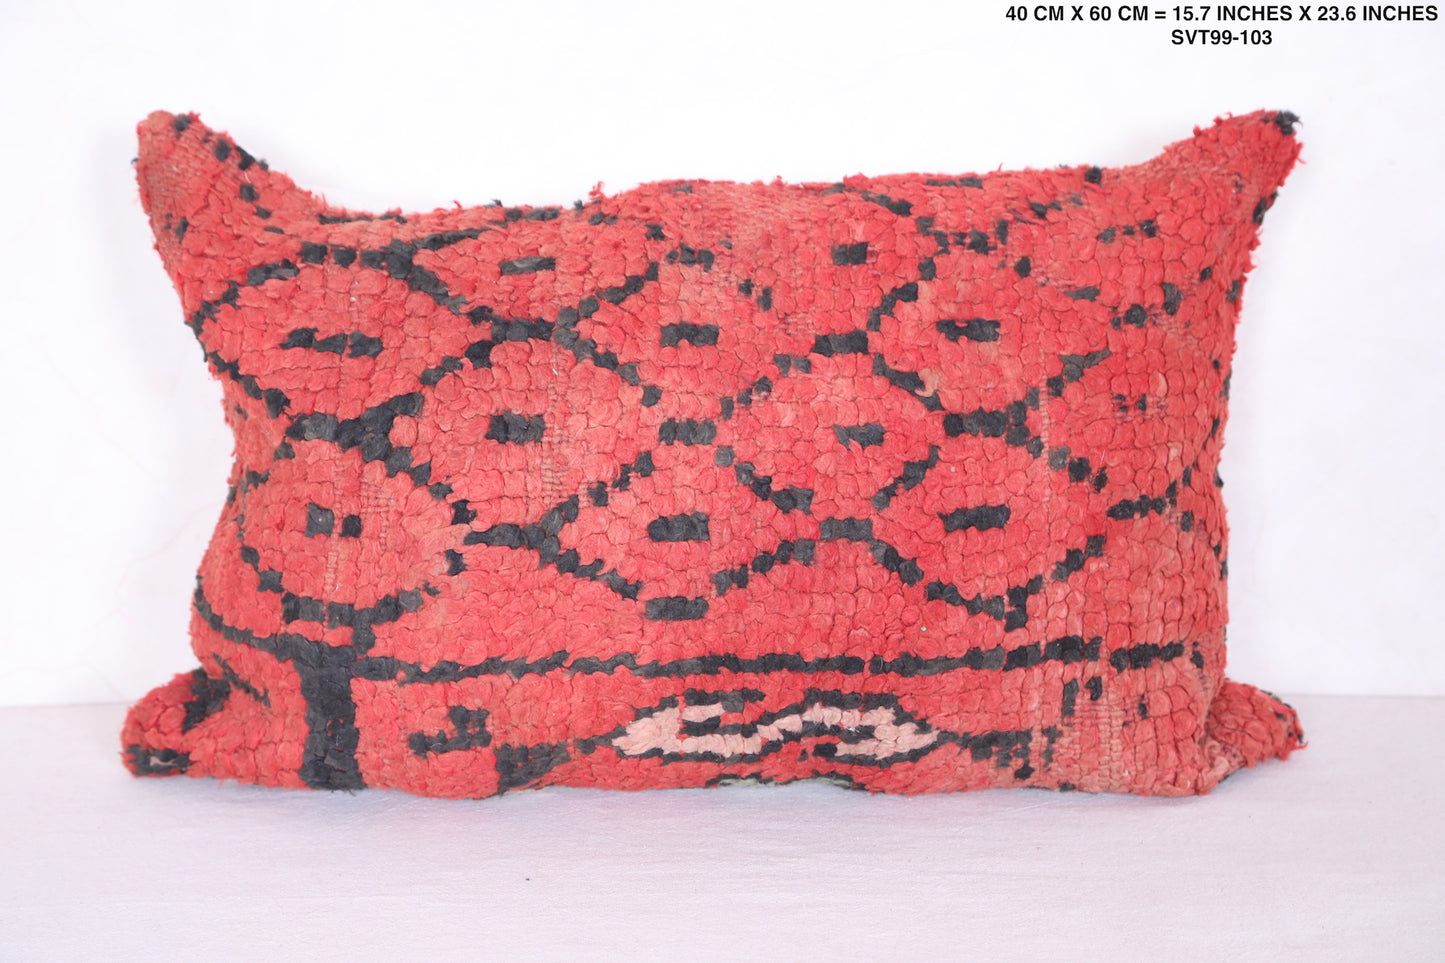 Moroccan handmade rug pillows 15.7 INCHES X 23.6 INCHES